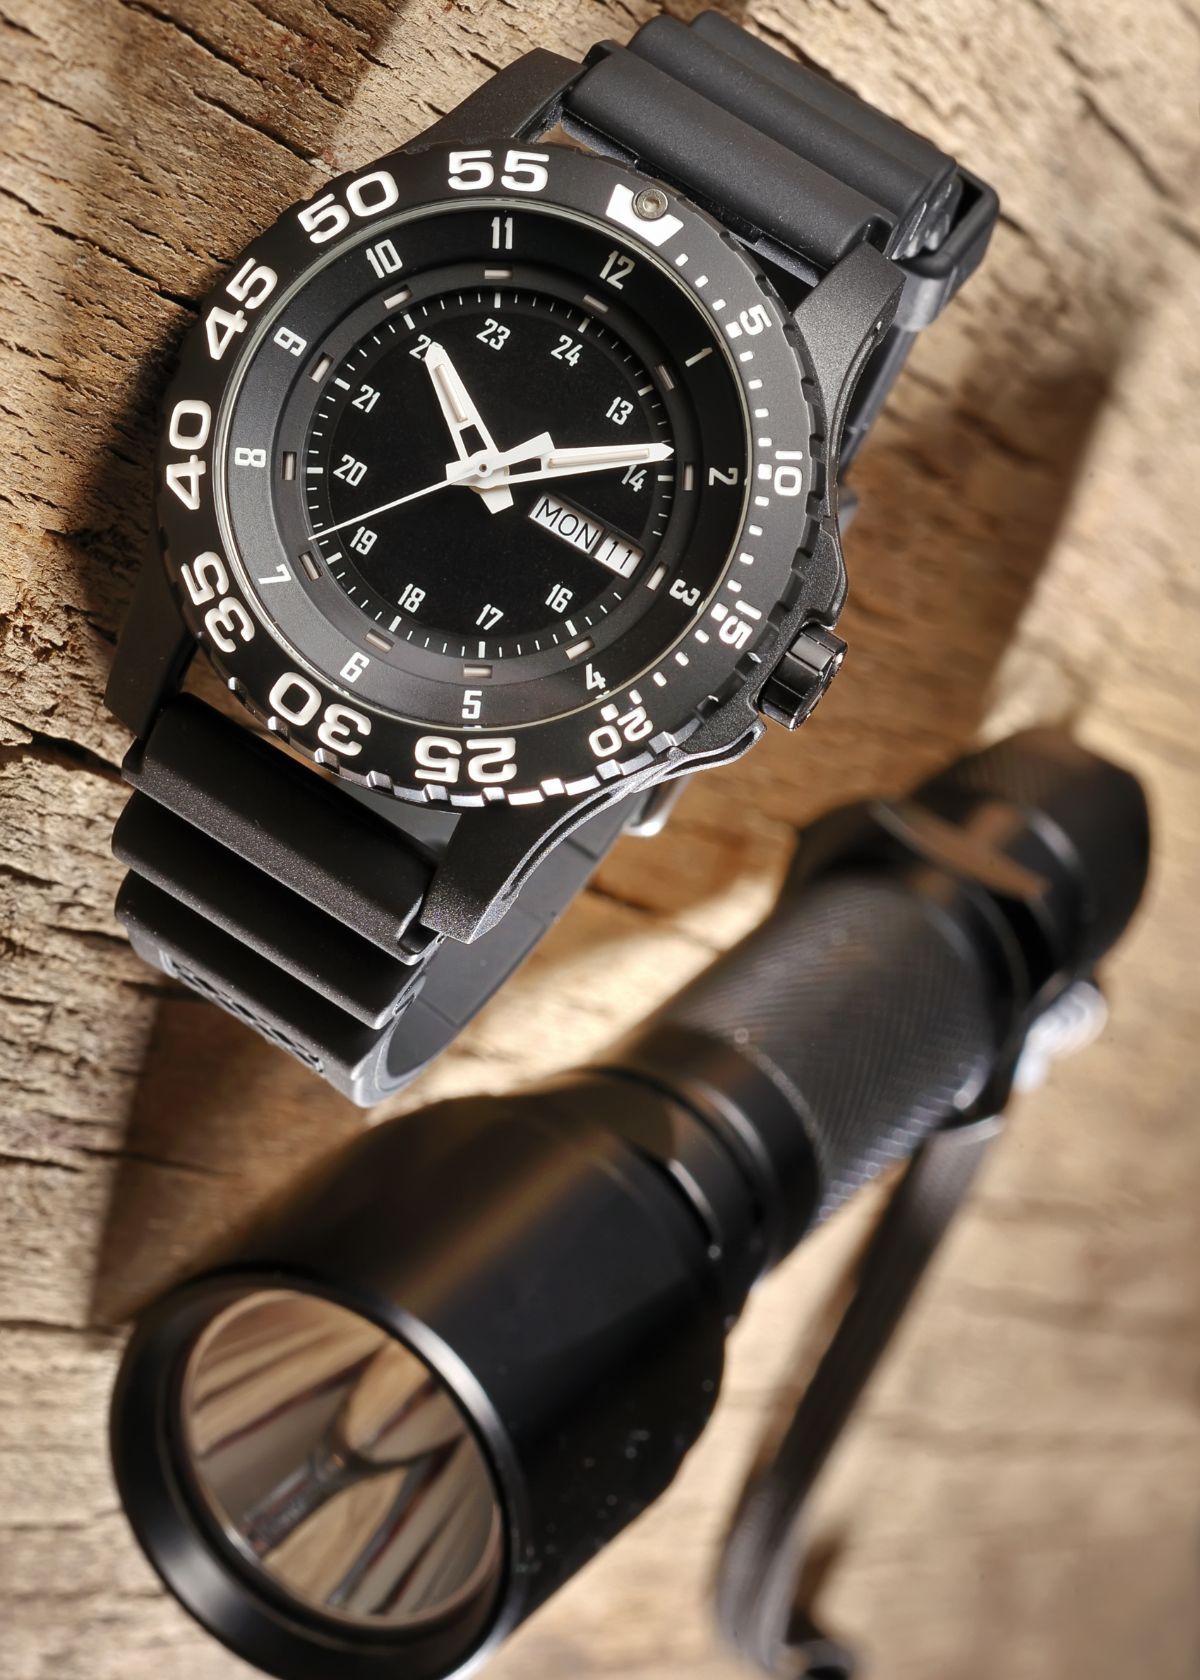 Why Do Military Wear Watches Upside Down